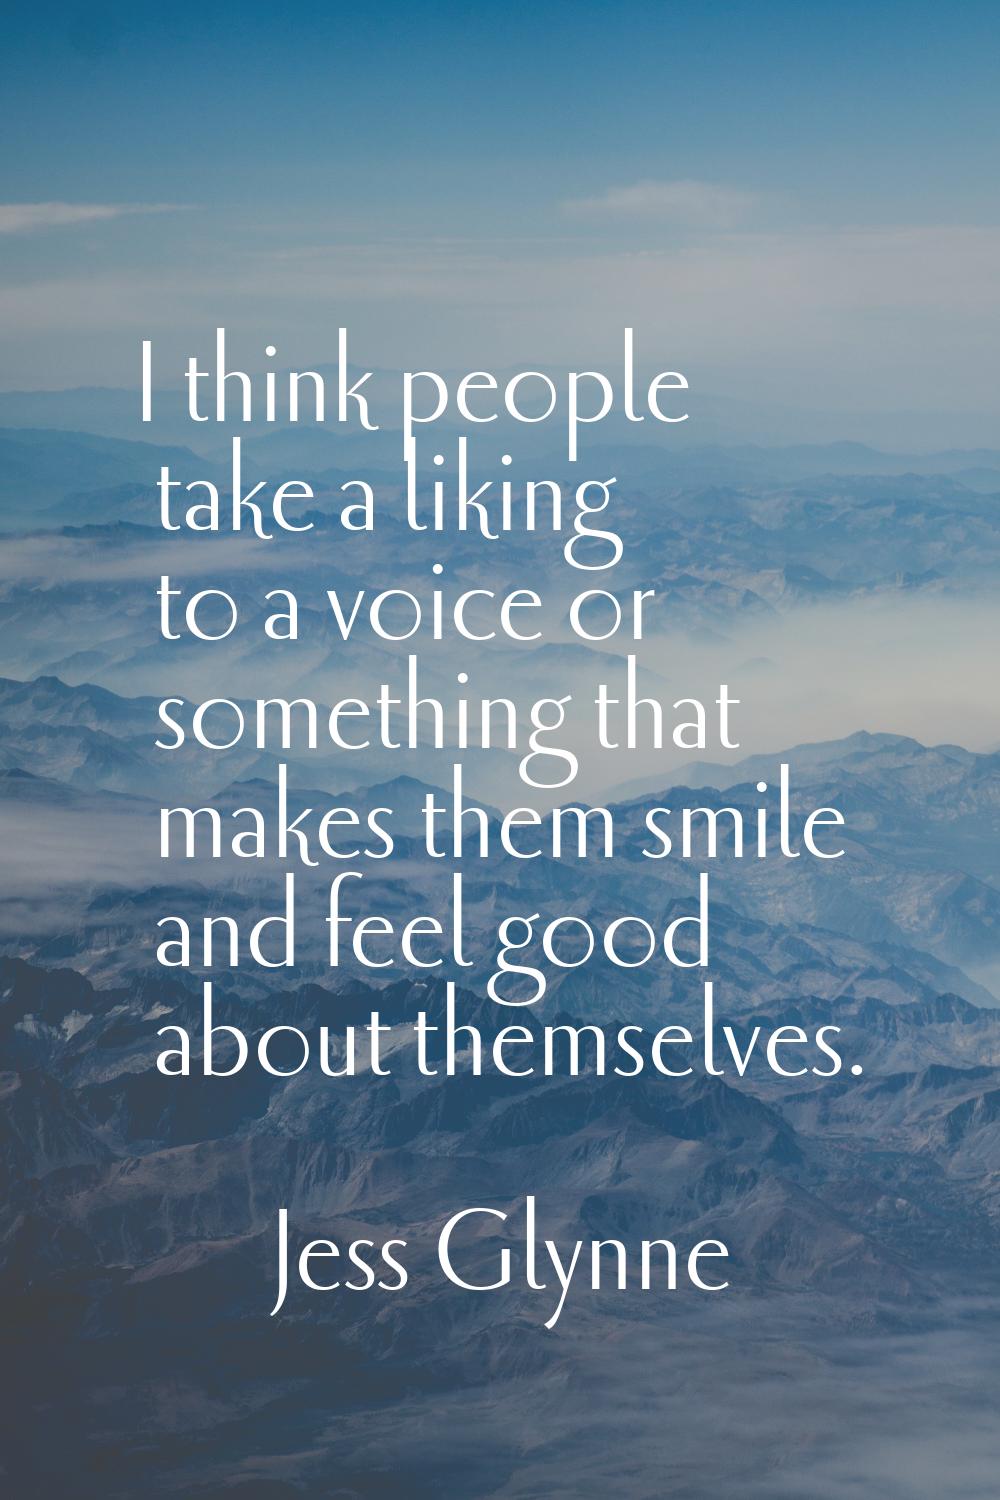 I think people take a liking to a voice or something that makes them smile and feel good about them